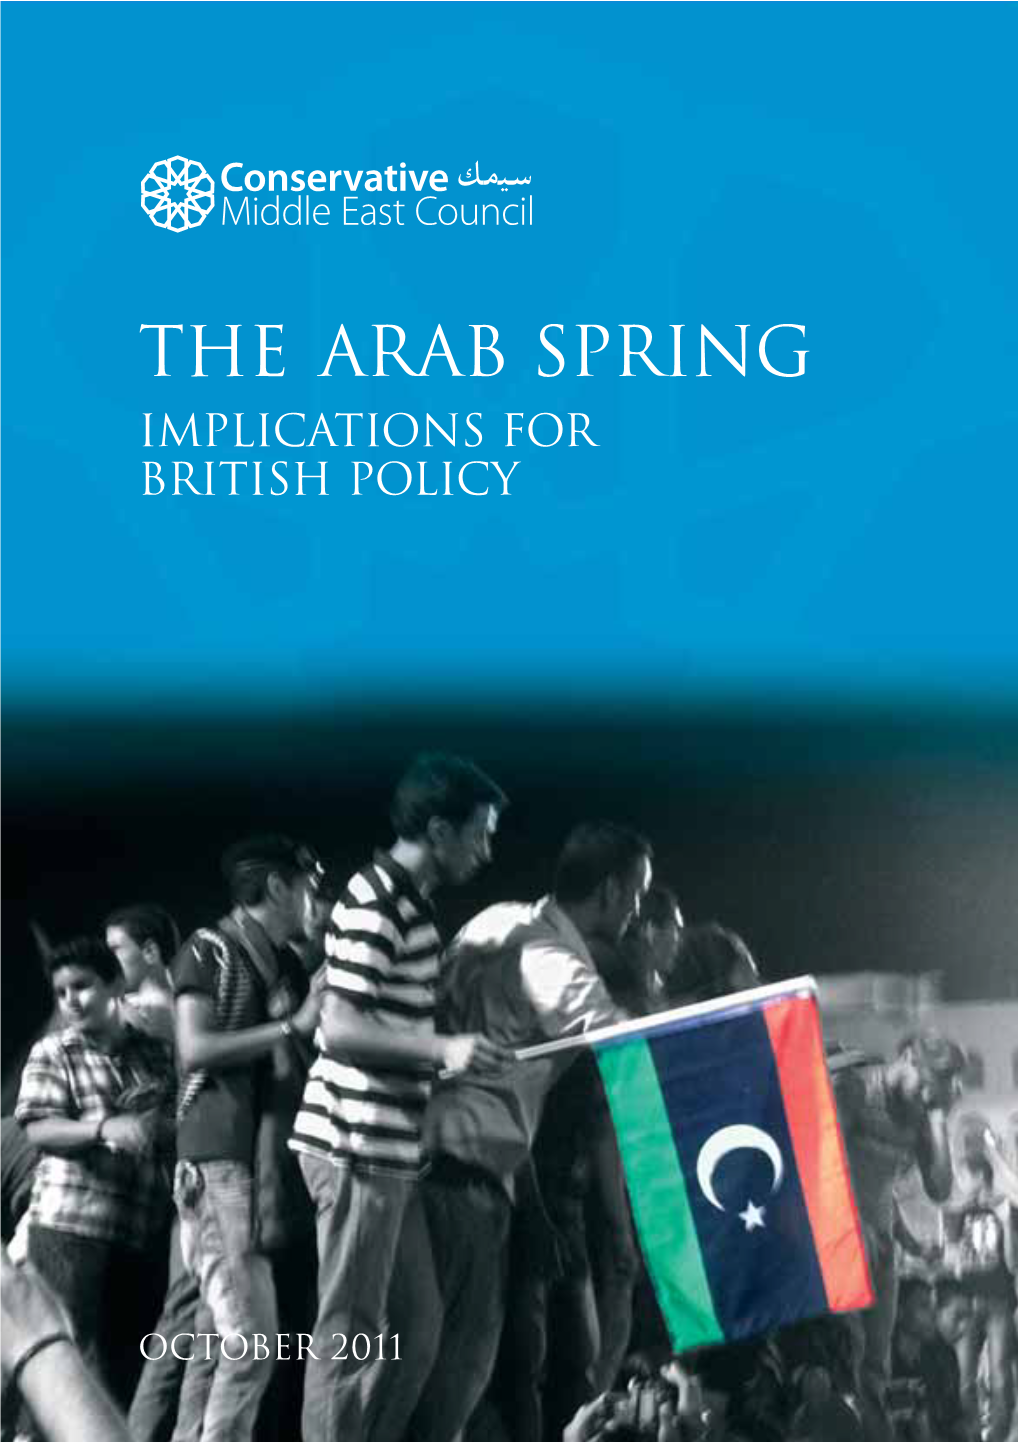 The Arab Spring Implications for British Policy